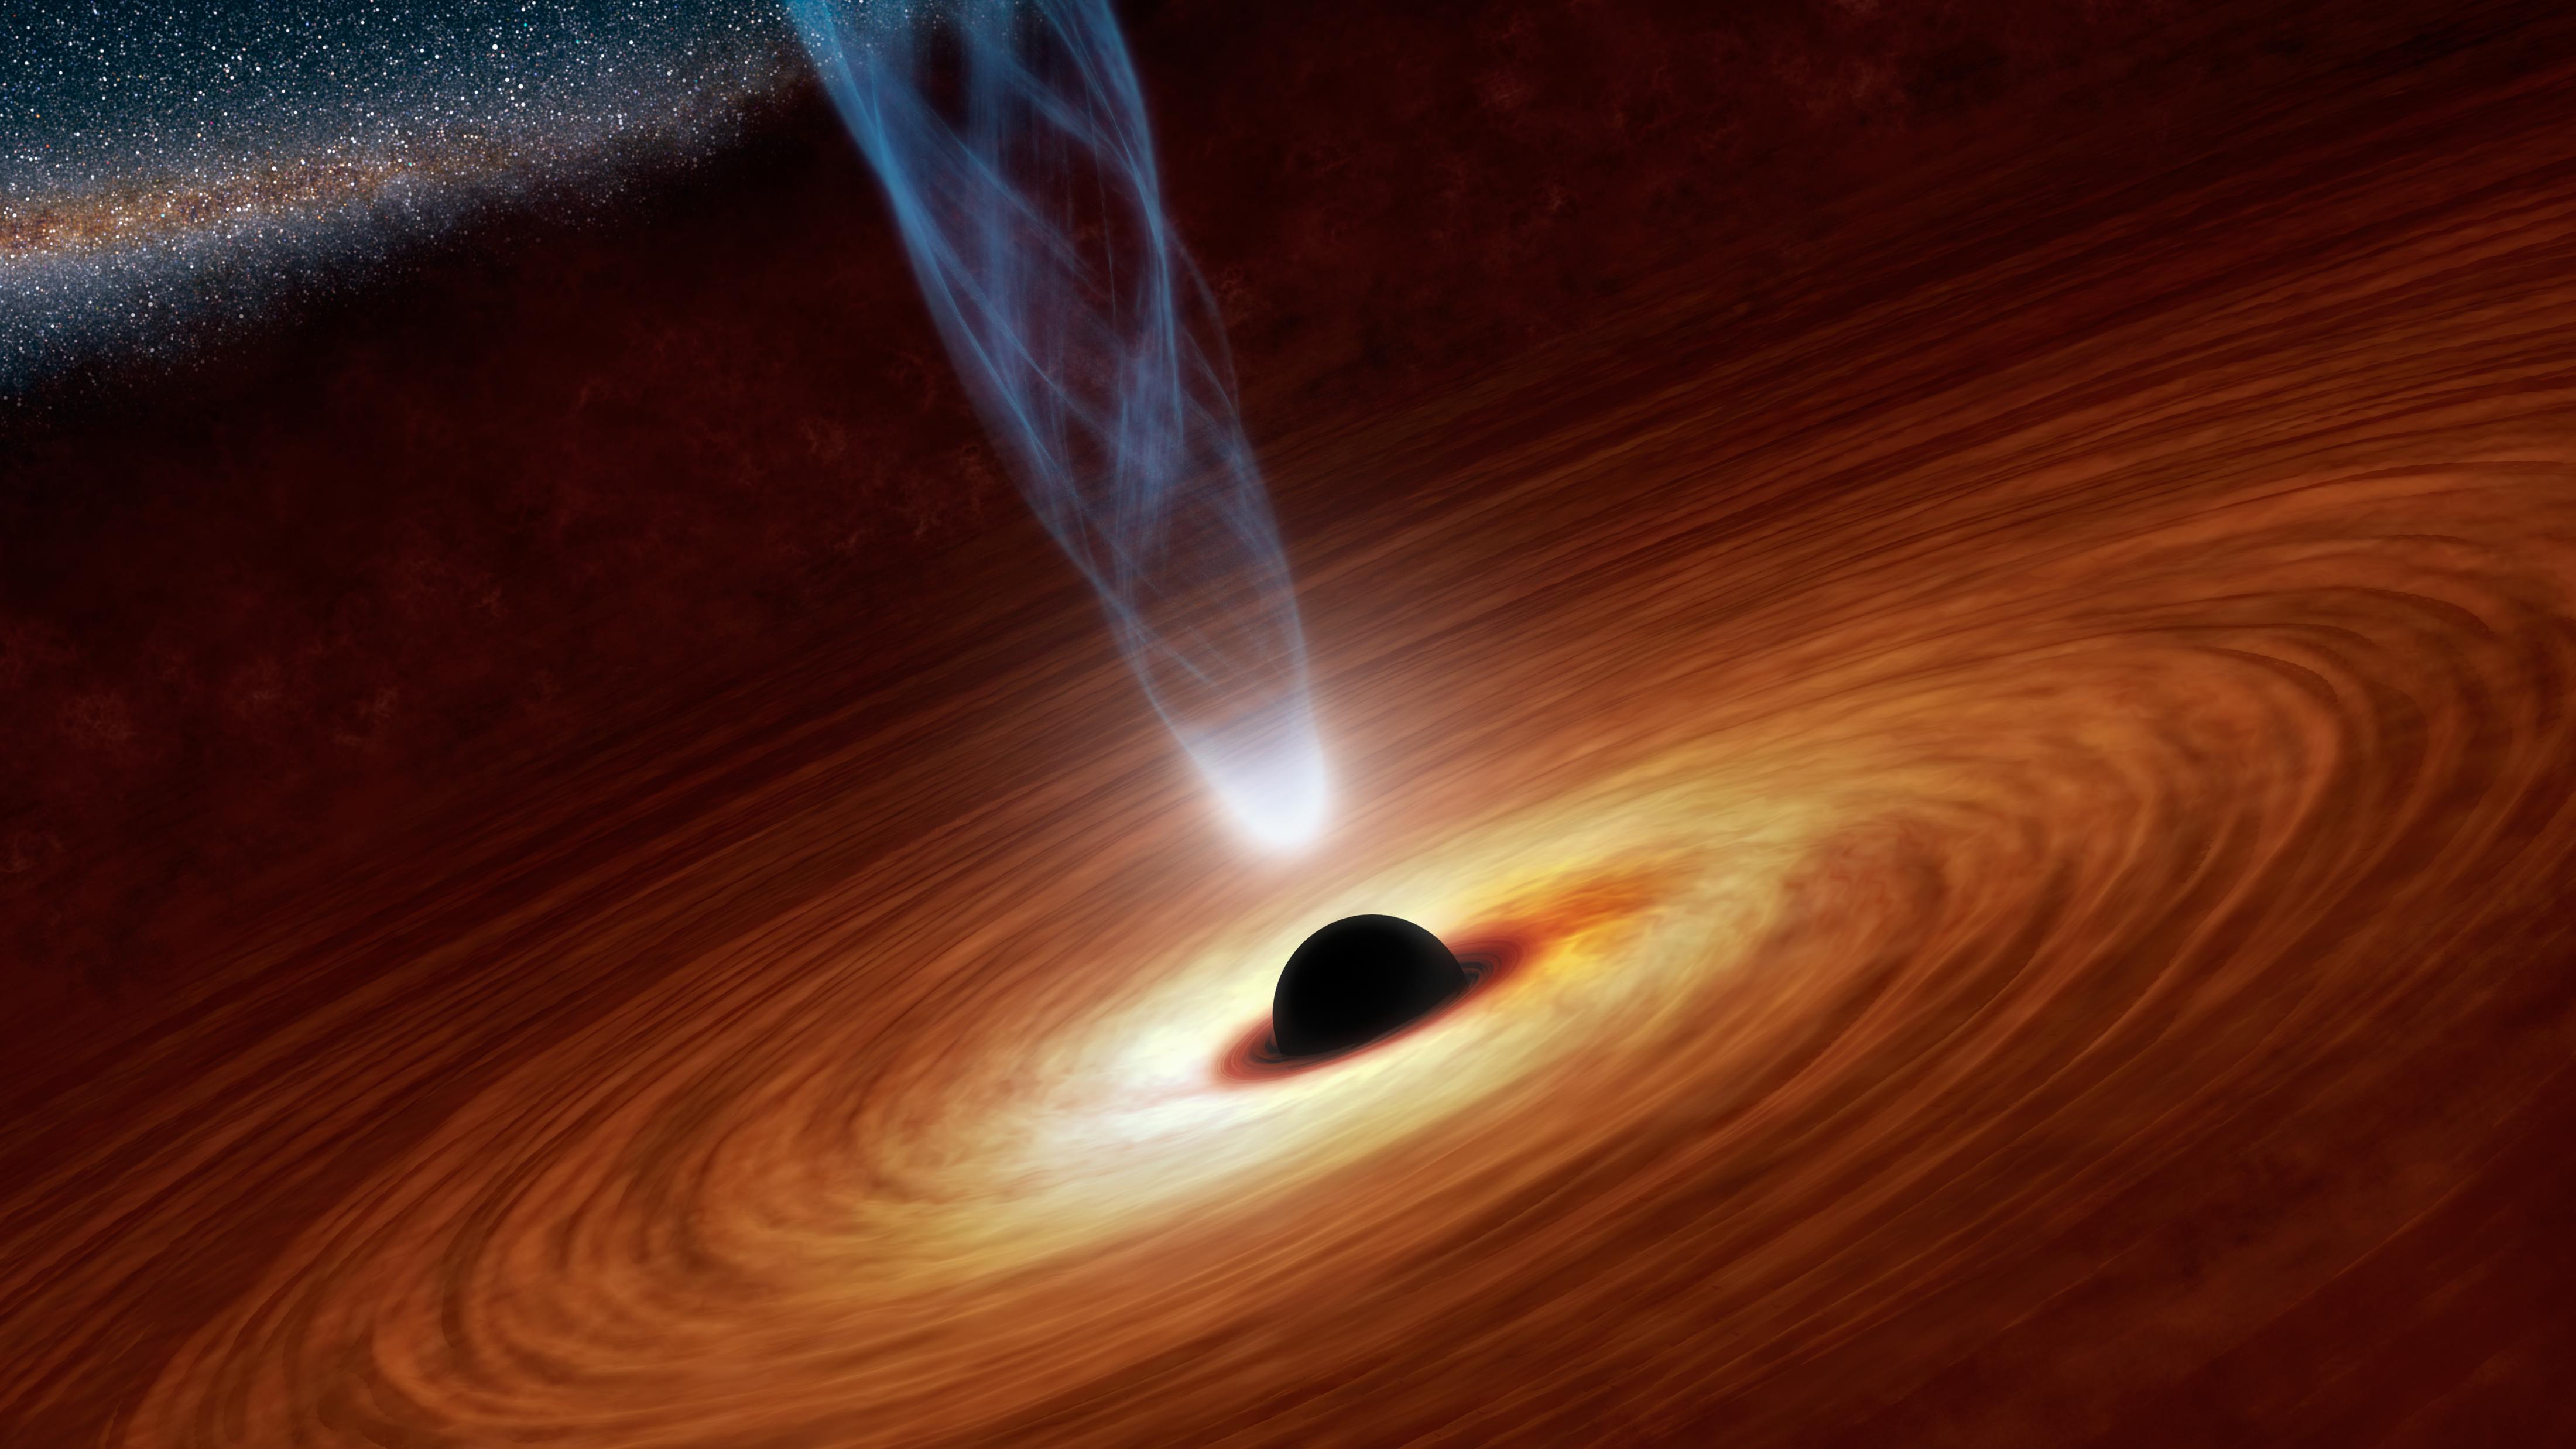 A NASA rendering of a supermassive black hole similar to the one that lies at the center of the Milky Way (NASA/JPL-Caltech)